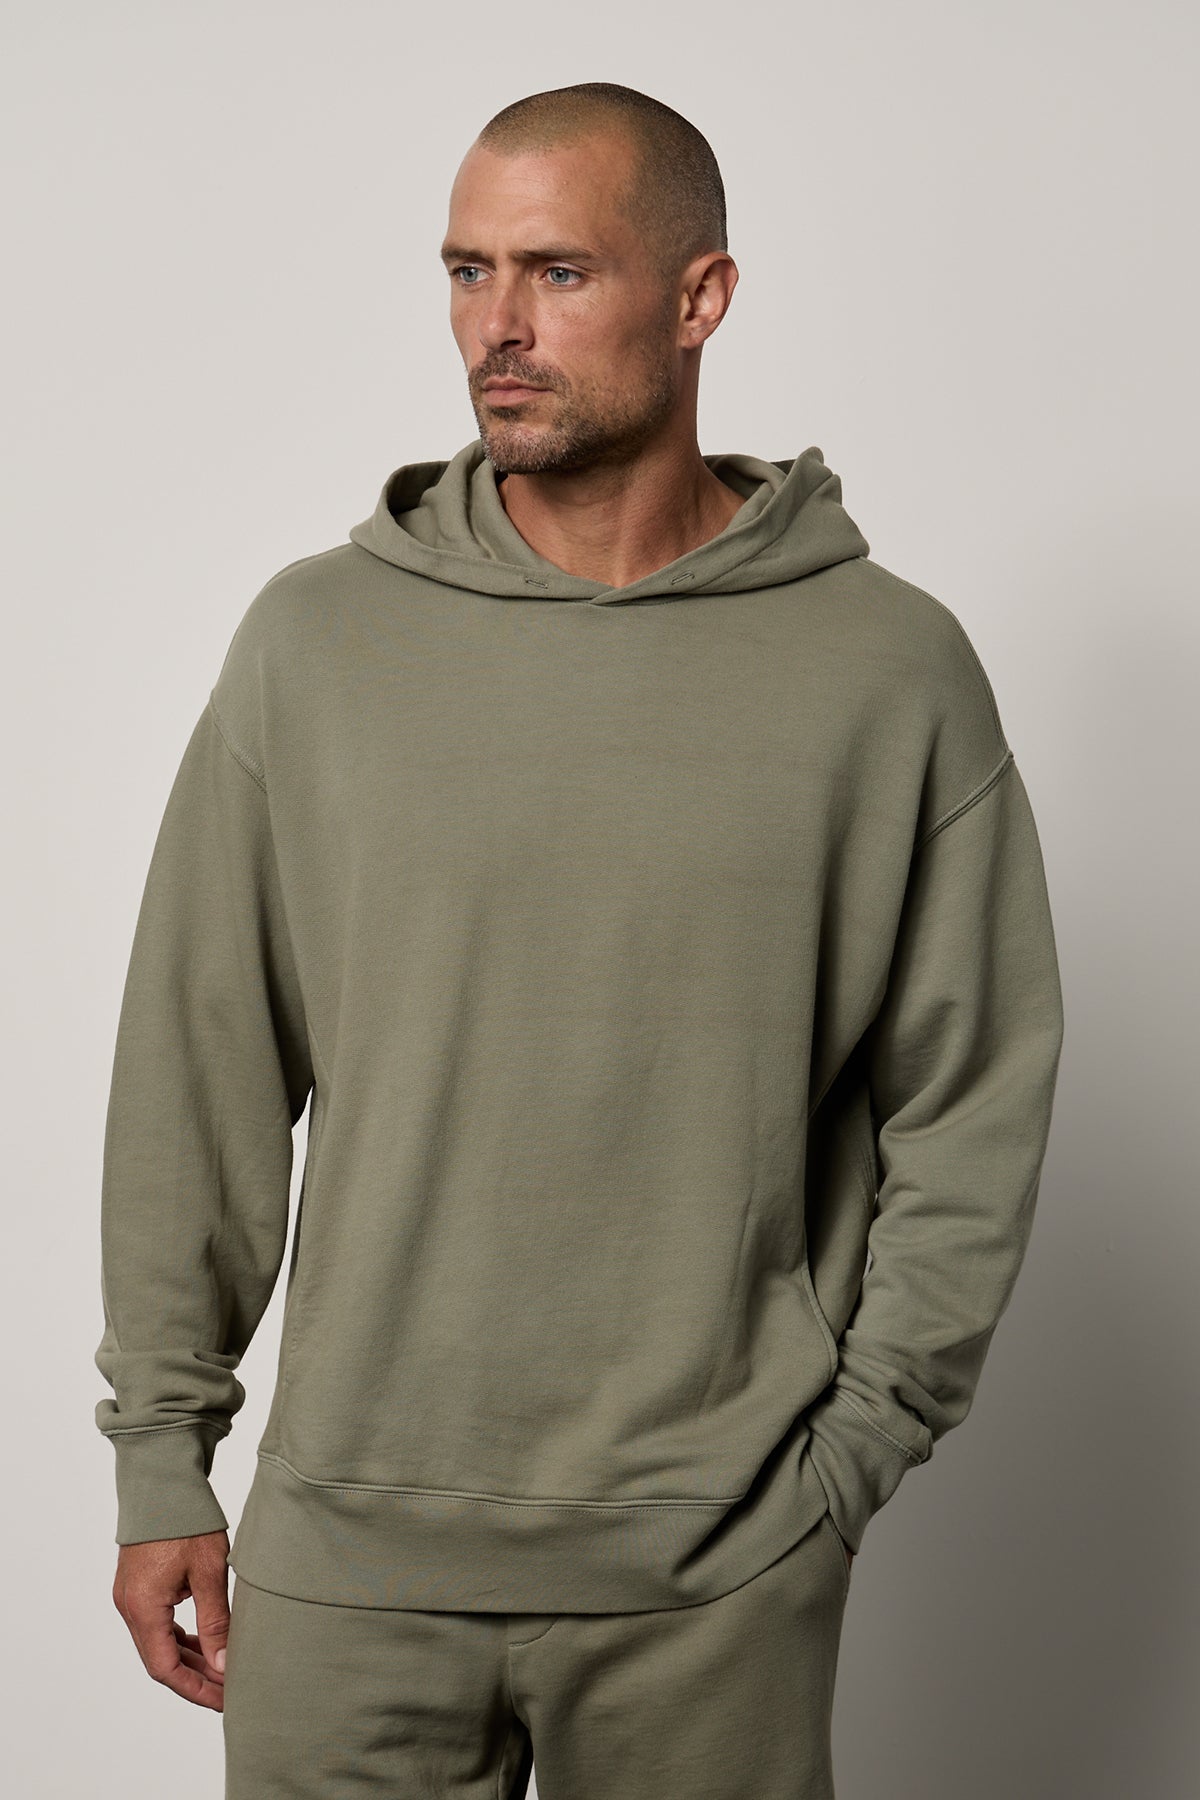 Dan Hoodie in camp muted green french terry with Kane short front-26249371812033